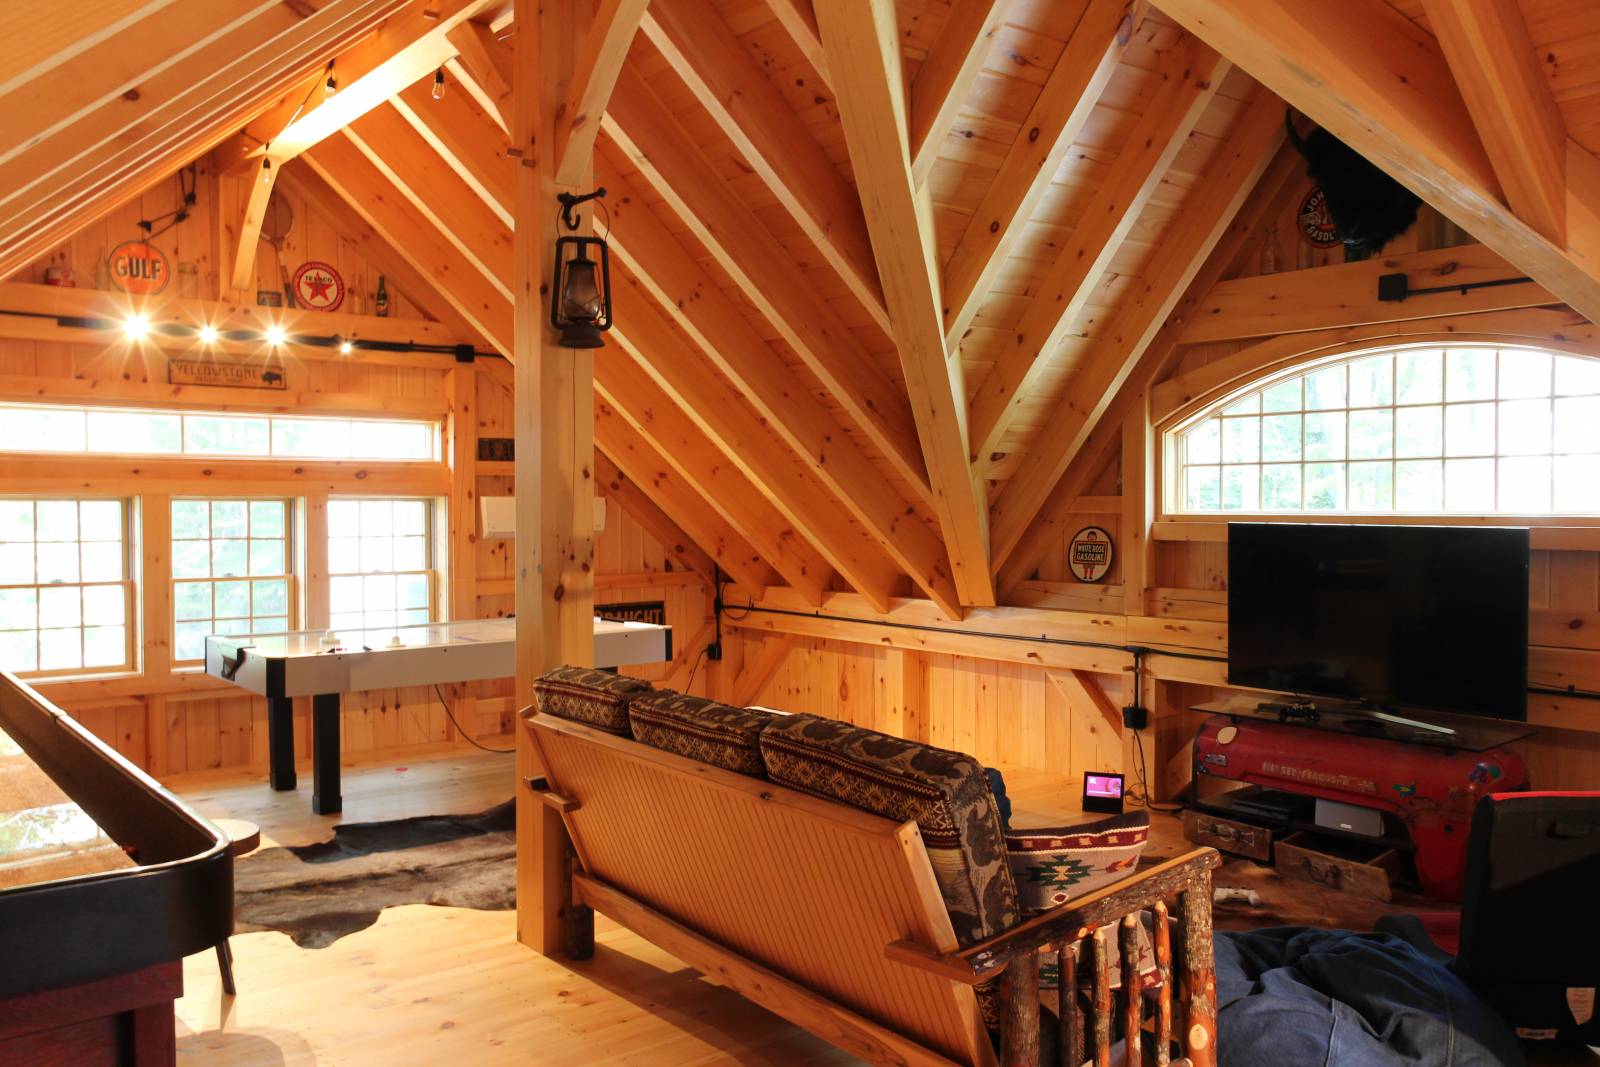 Upstairs: Post and Beam Game Room • Exposed Timbers • Gable Dormer • Andersen Windows